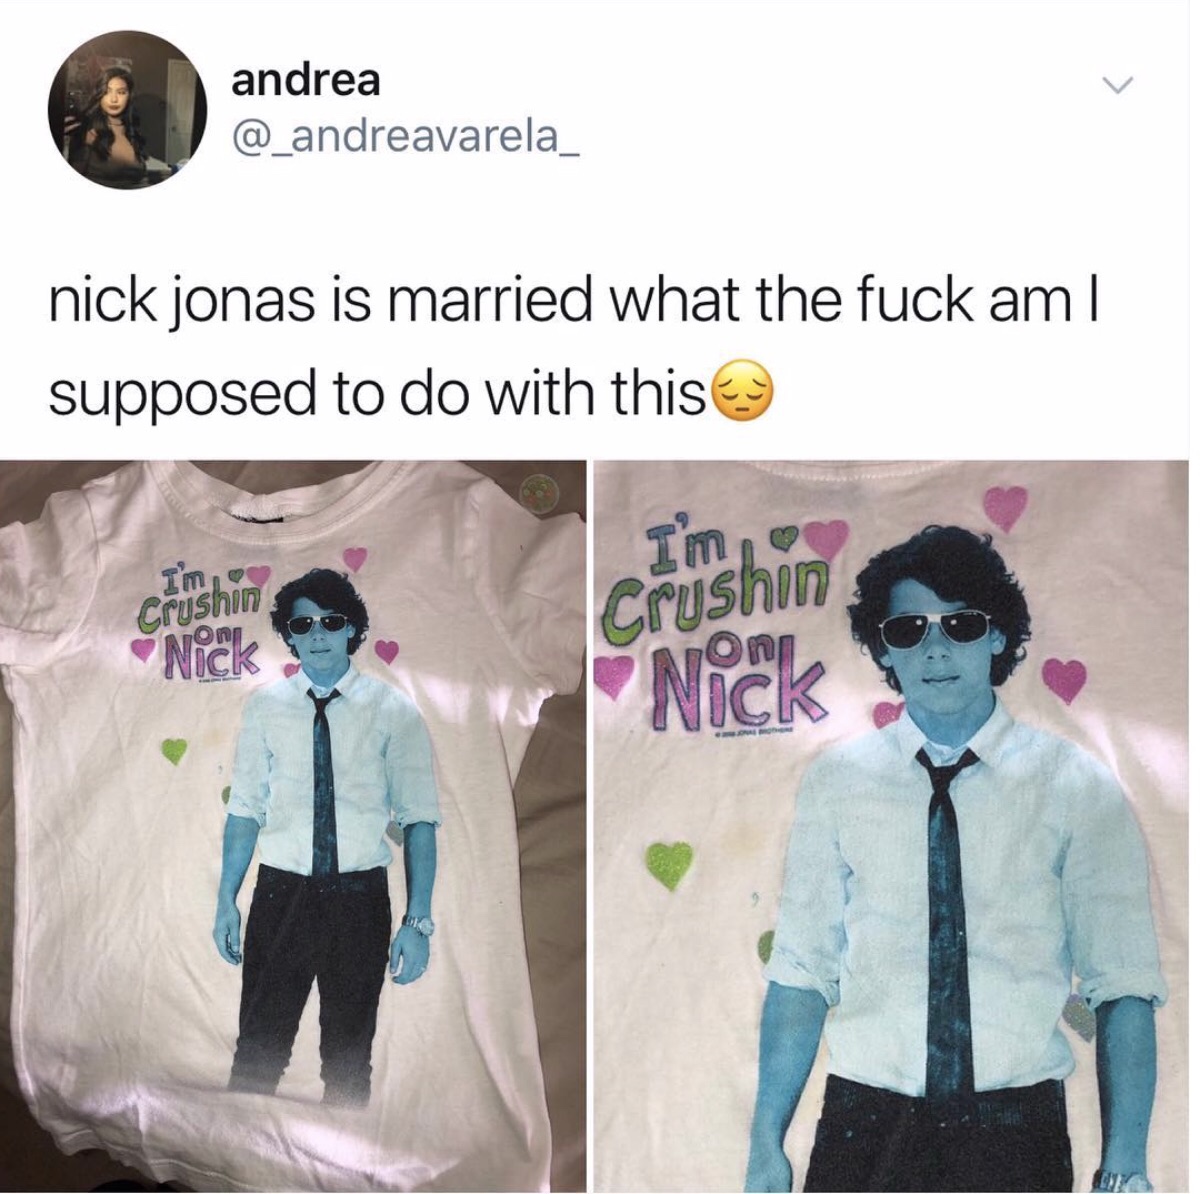 memes - meme t shirt - andrea nick jonas is married what the fuck am || supposed to do with this